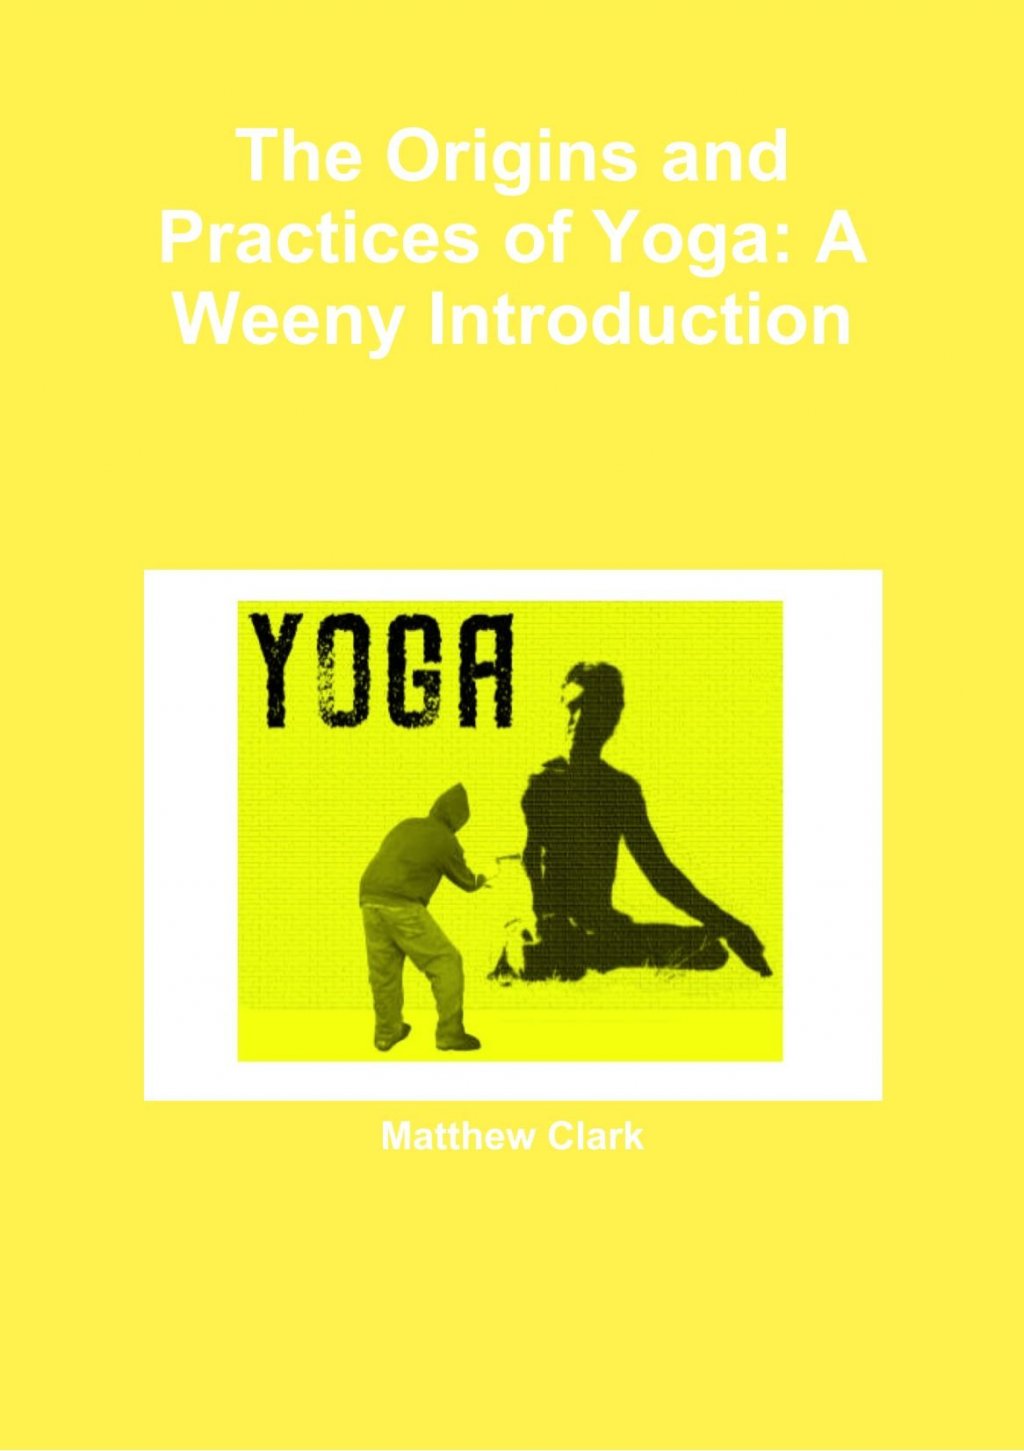 The Origins and Practices of Yoga